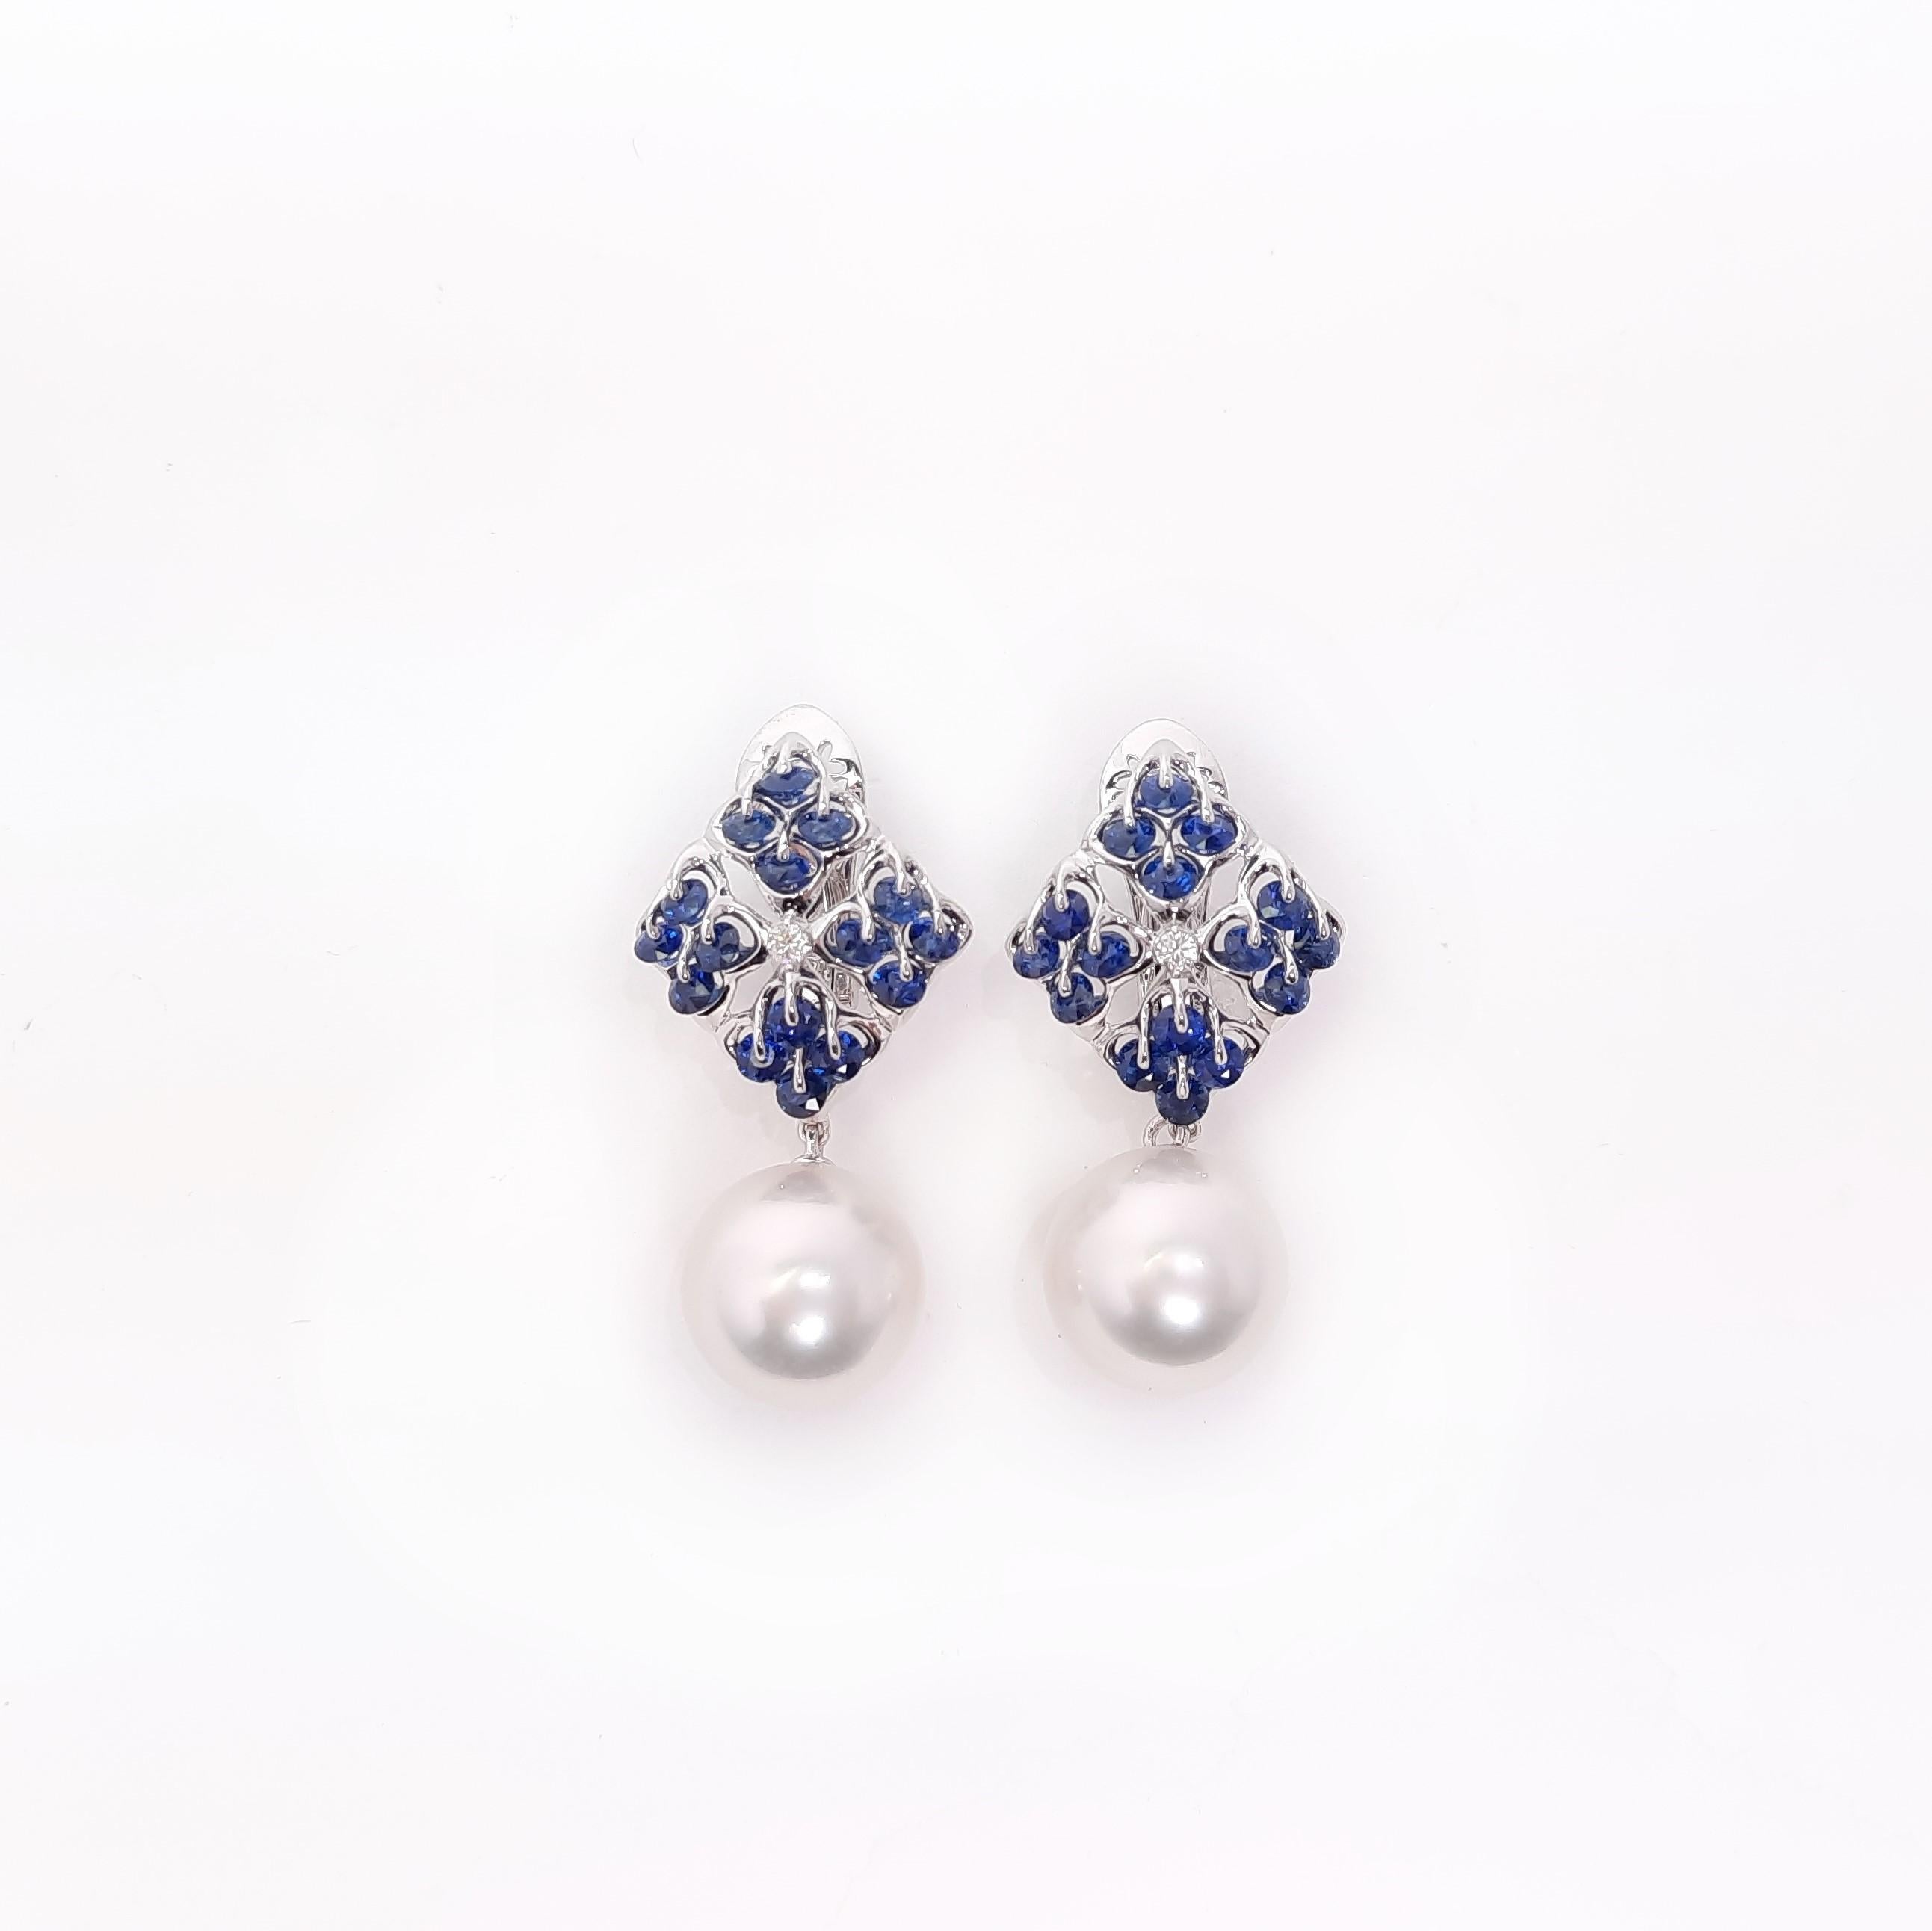 A pair of the top quality 11mm round South Sea Pearl is elegantly designed in our star shape sapphire earrings, mounted in a unique gem stone setting, Waltzing Brilliance. A spectacular dance performance of diamond cut blue sapphires on the